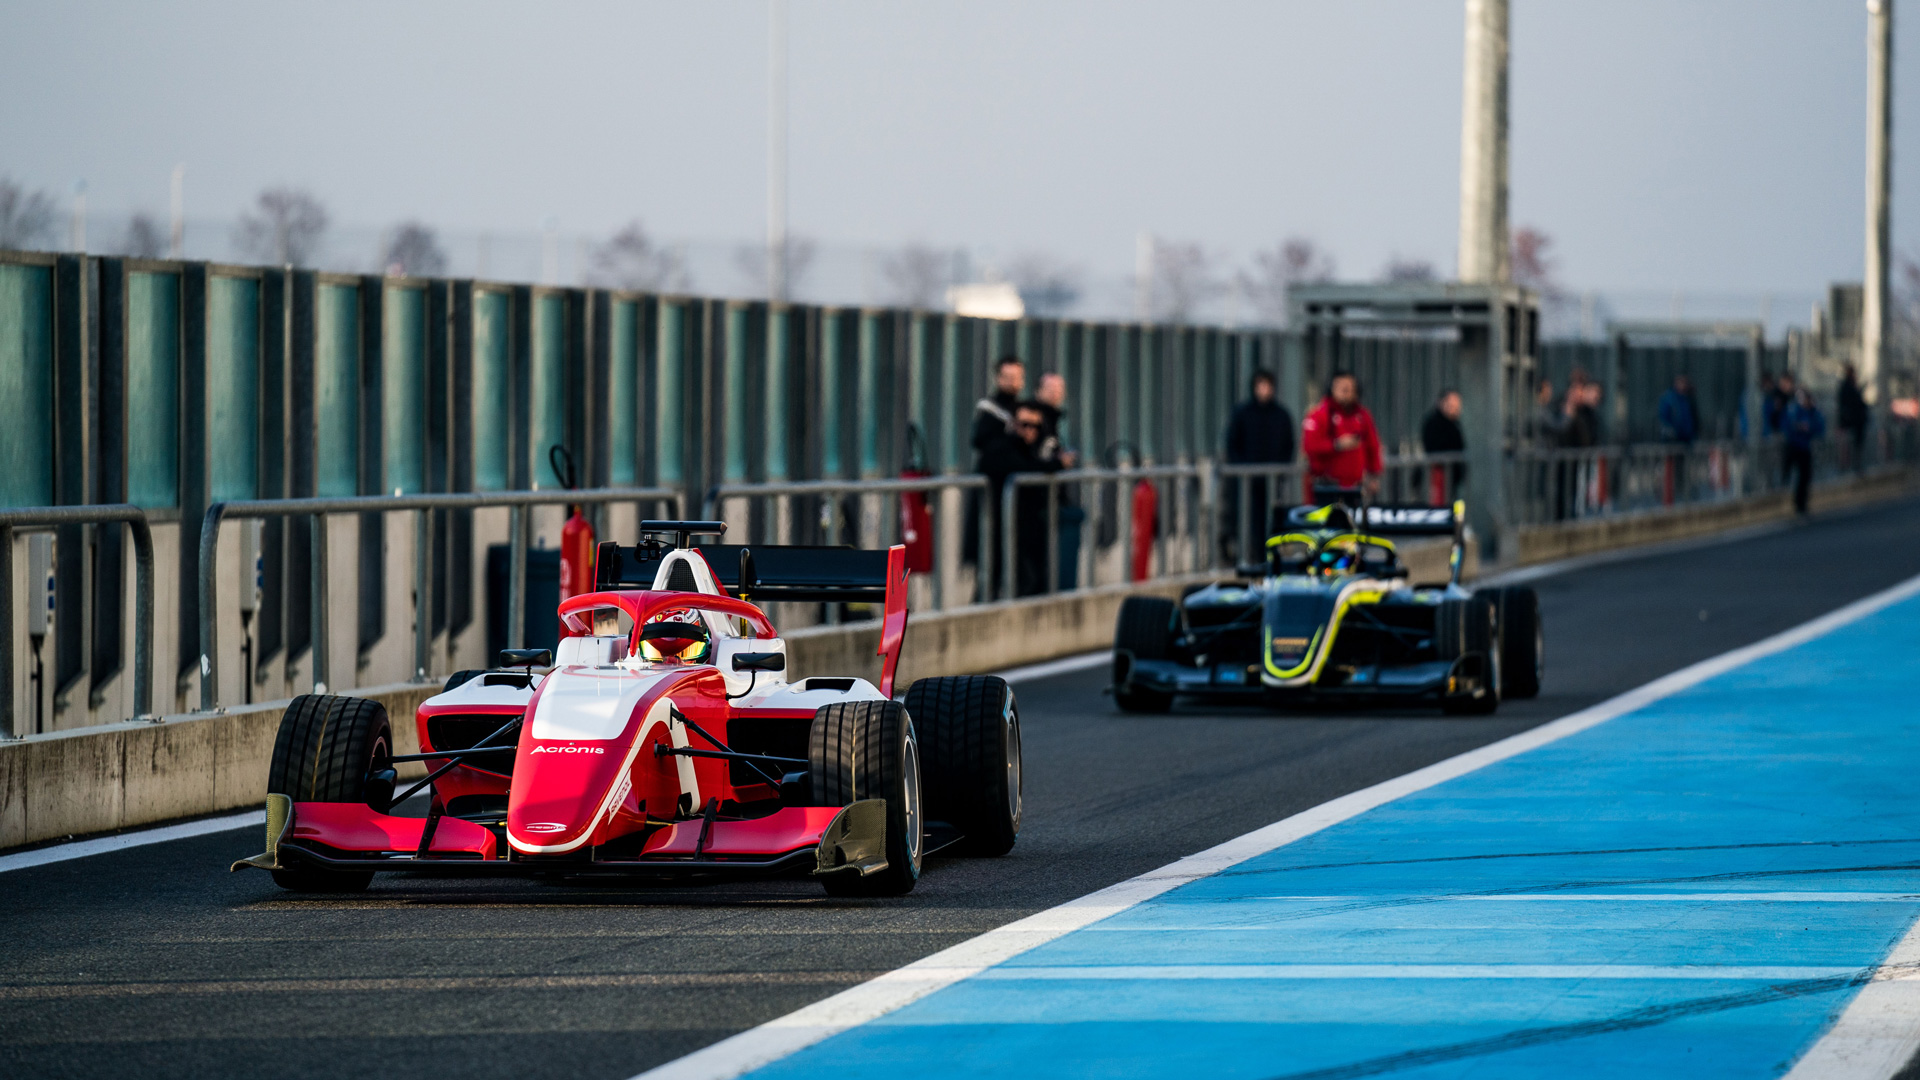 F3: Four female drivers, including three from the W Series, will test at Magny-Cours